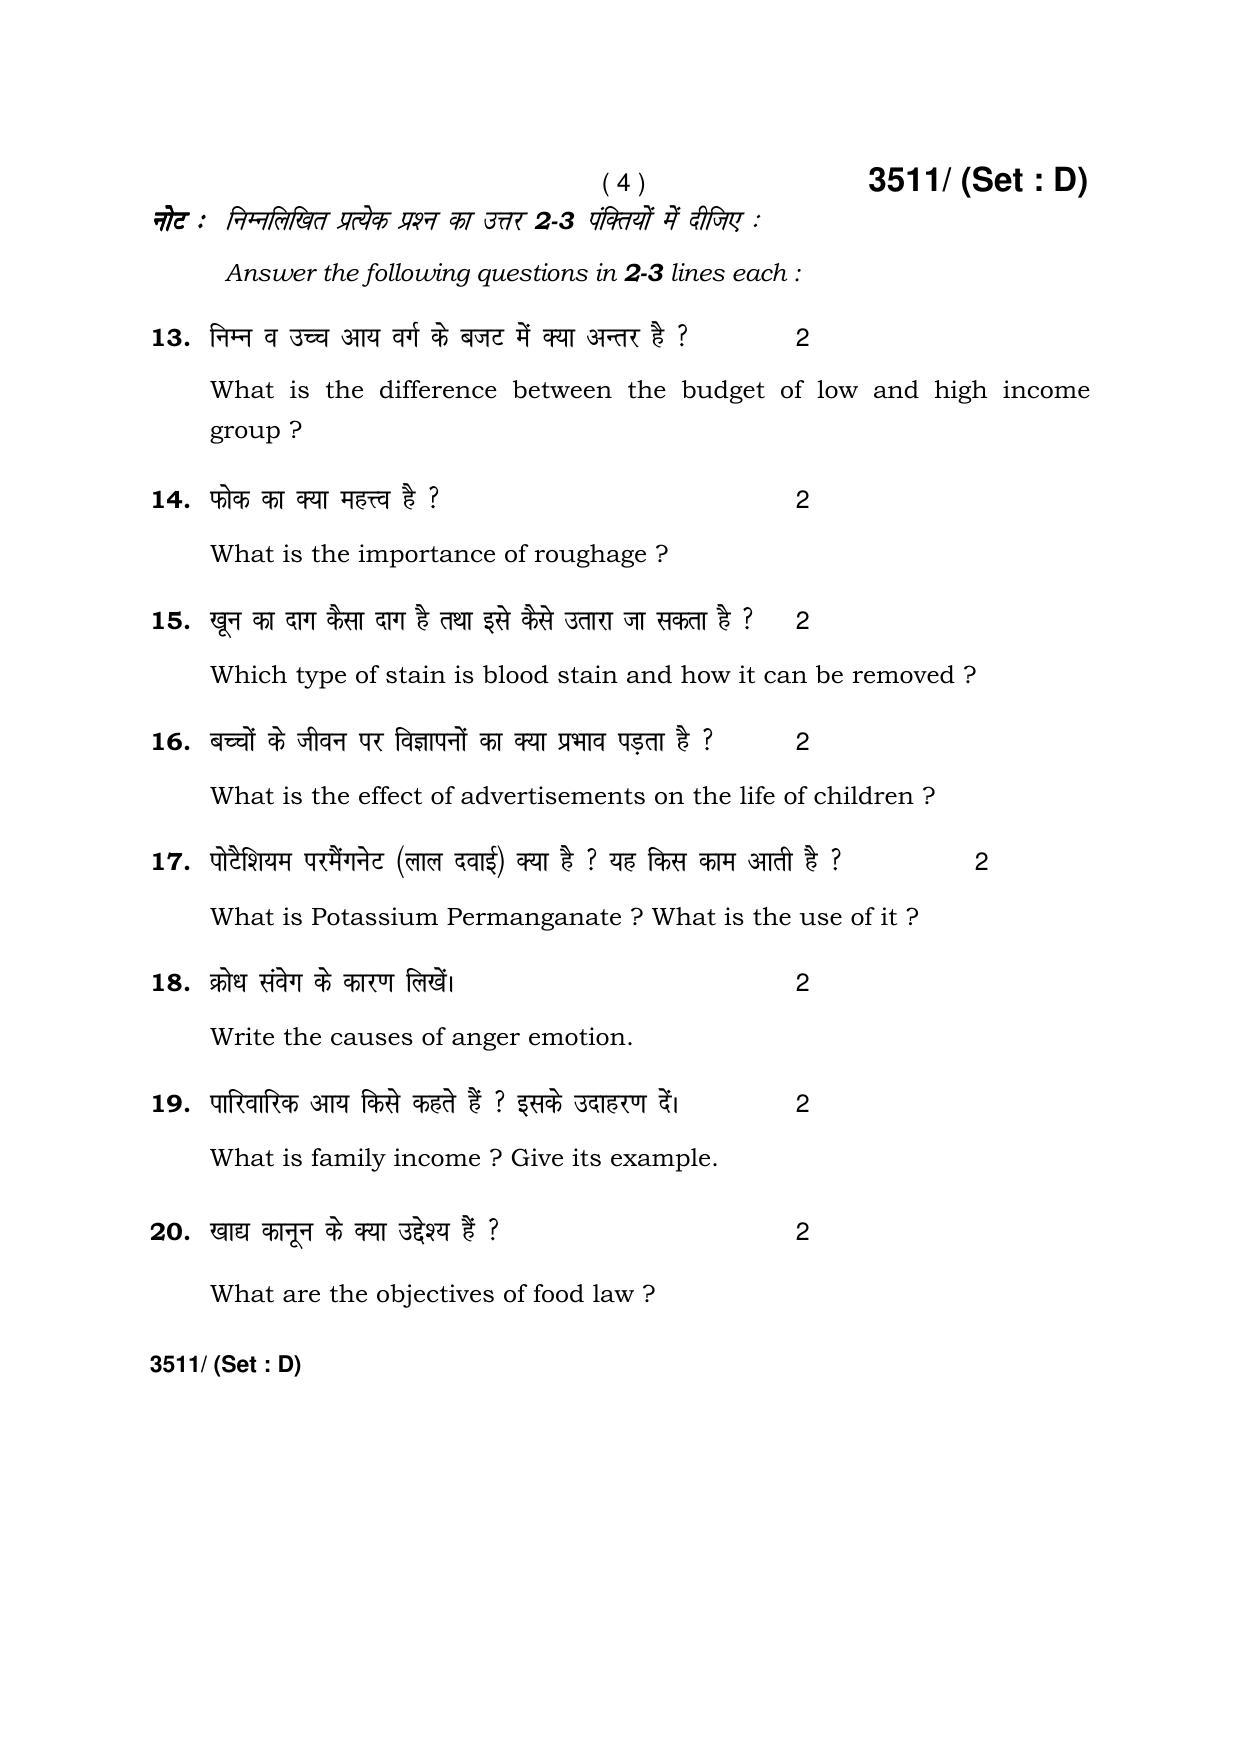 Haryana Board HBSE Class 10 Home Science -D 2018 Question Paper - Page 4